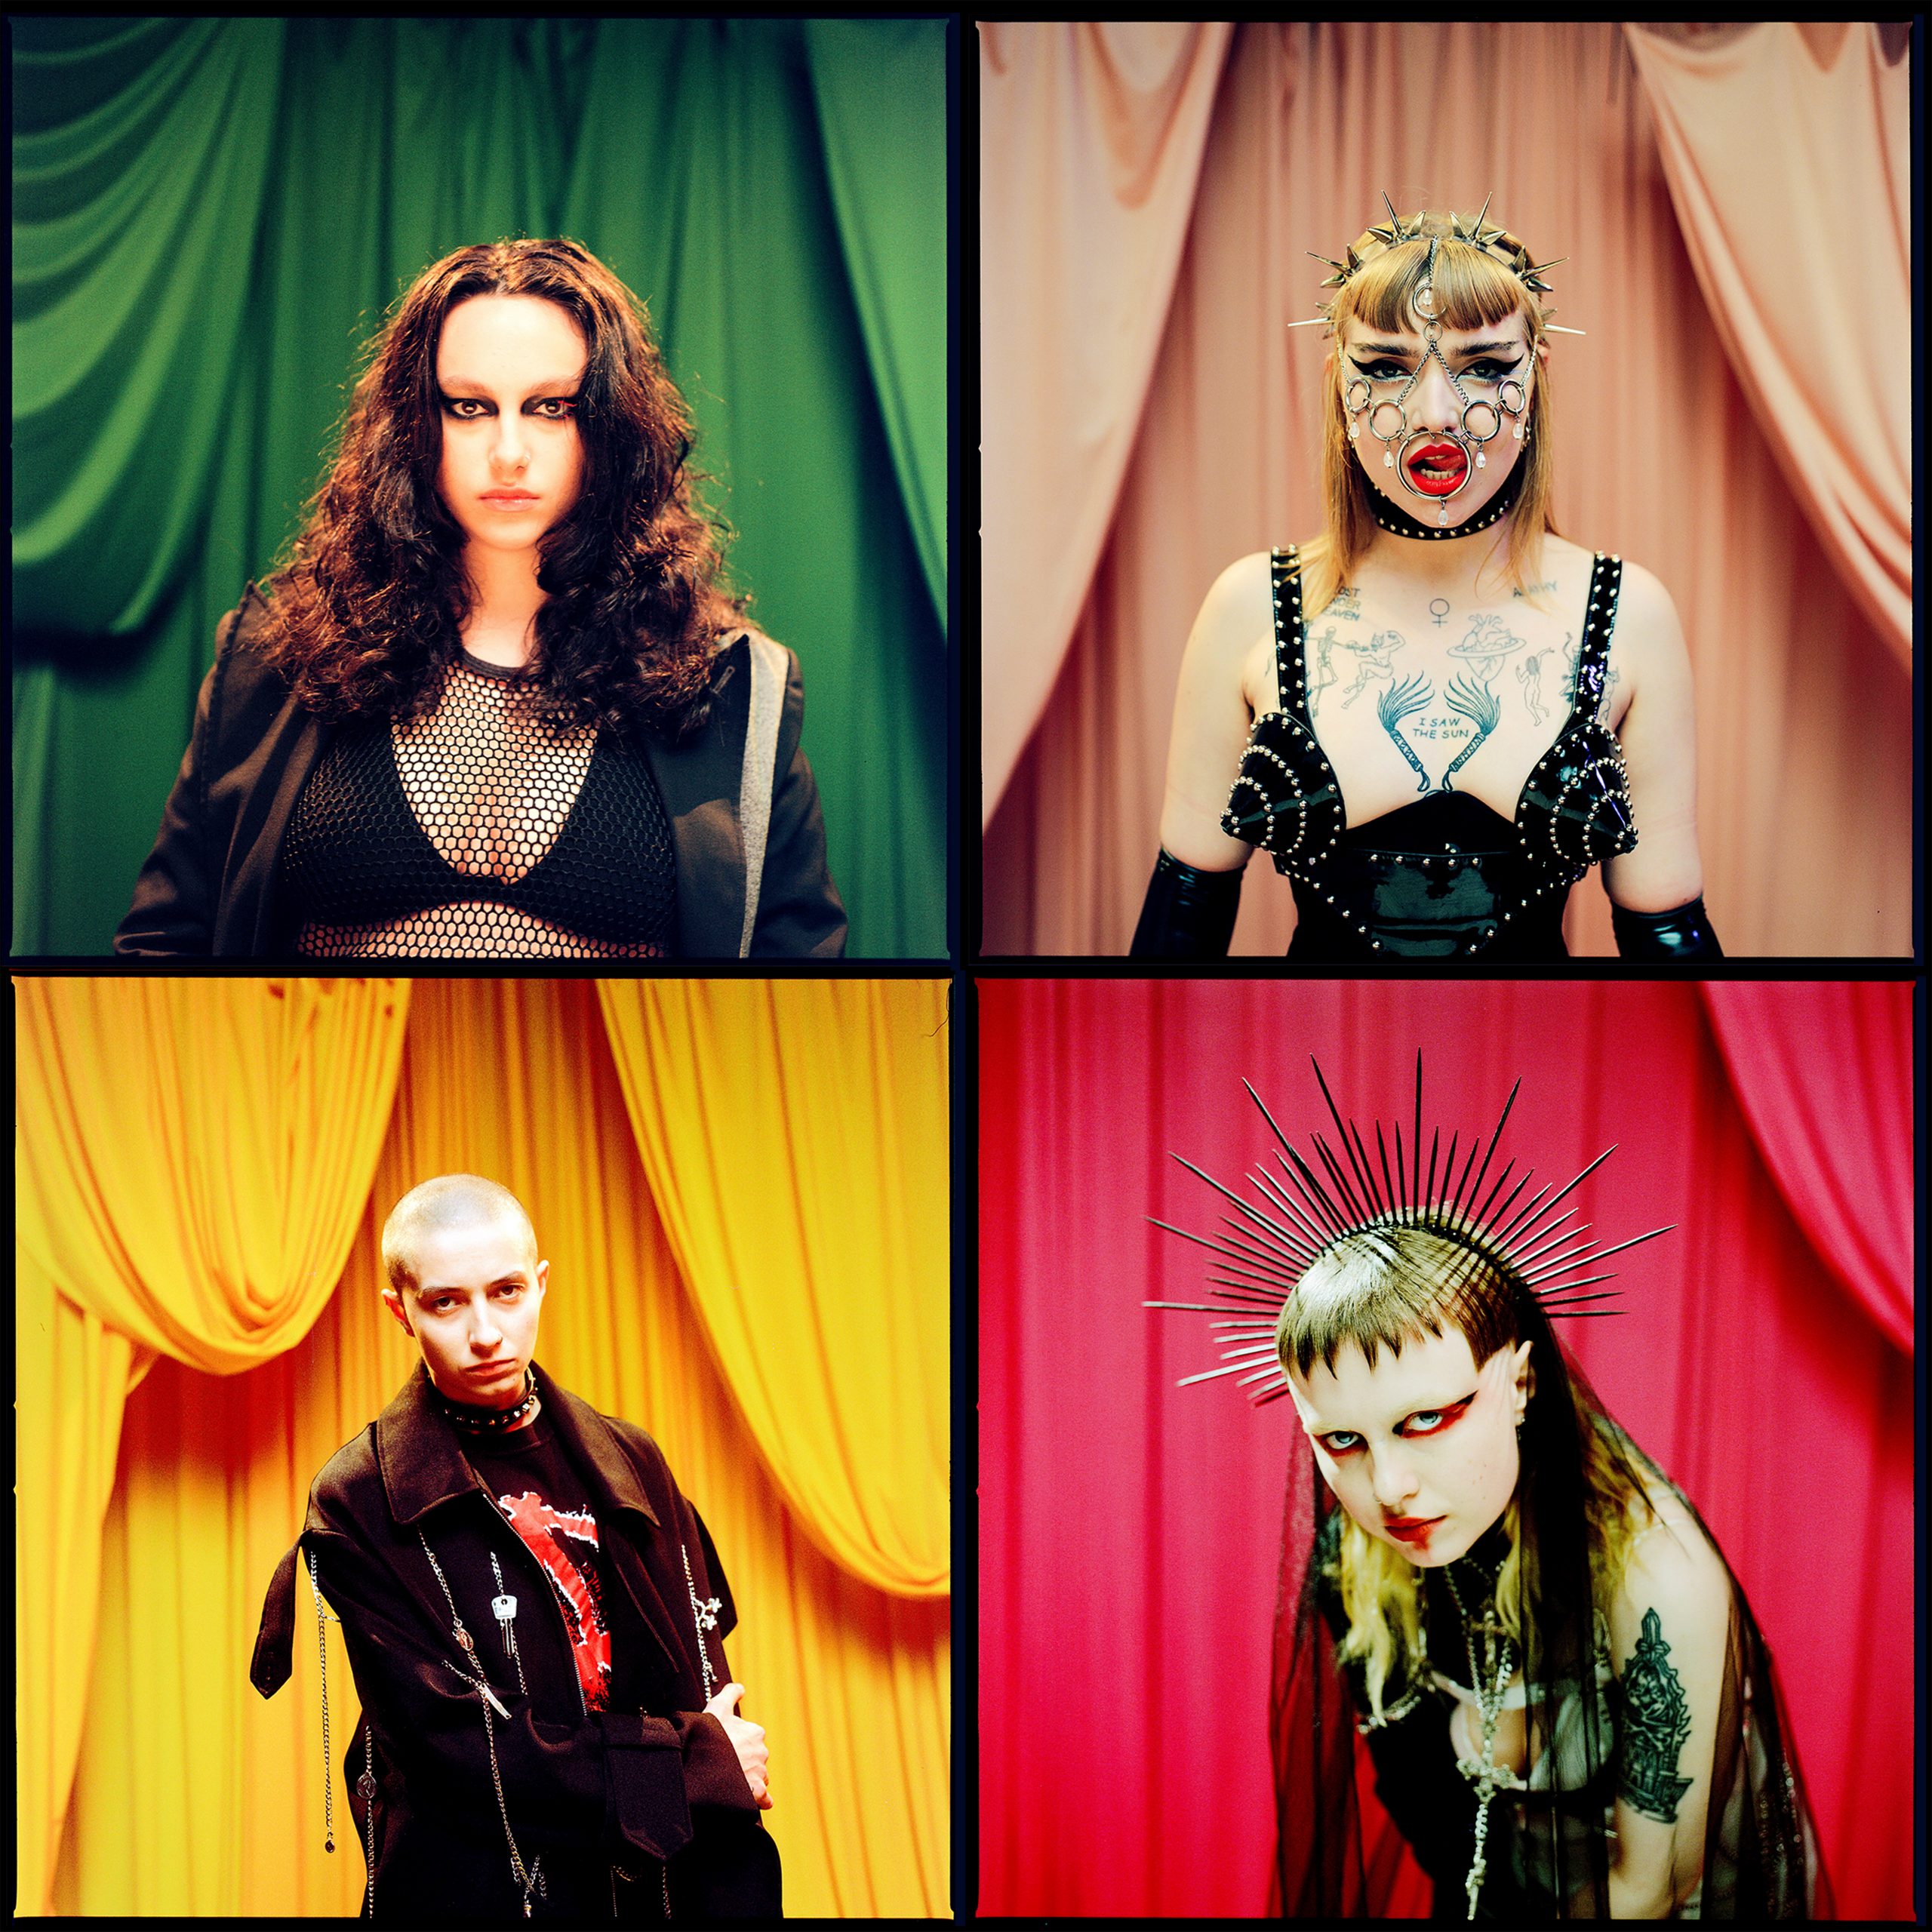 Individual pictures of the four members of the band Witch Fever